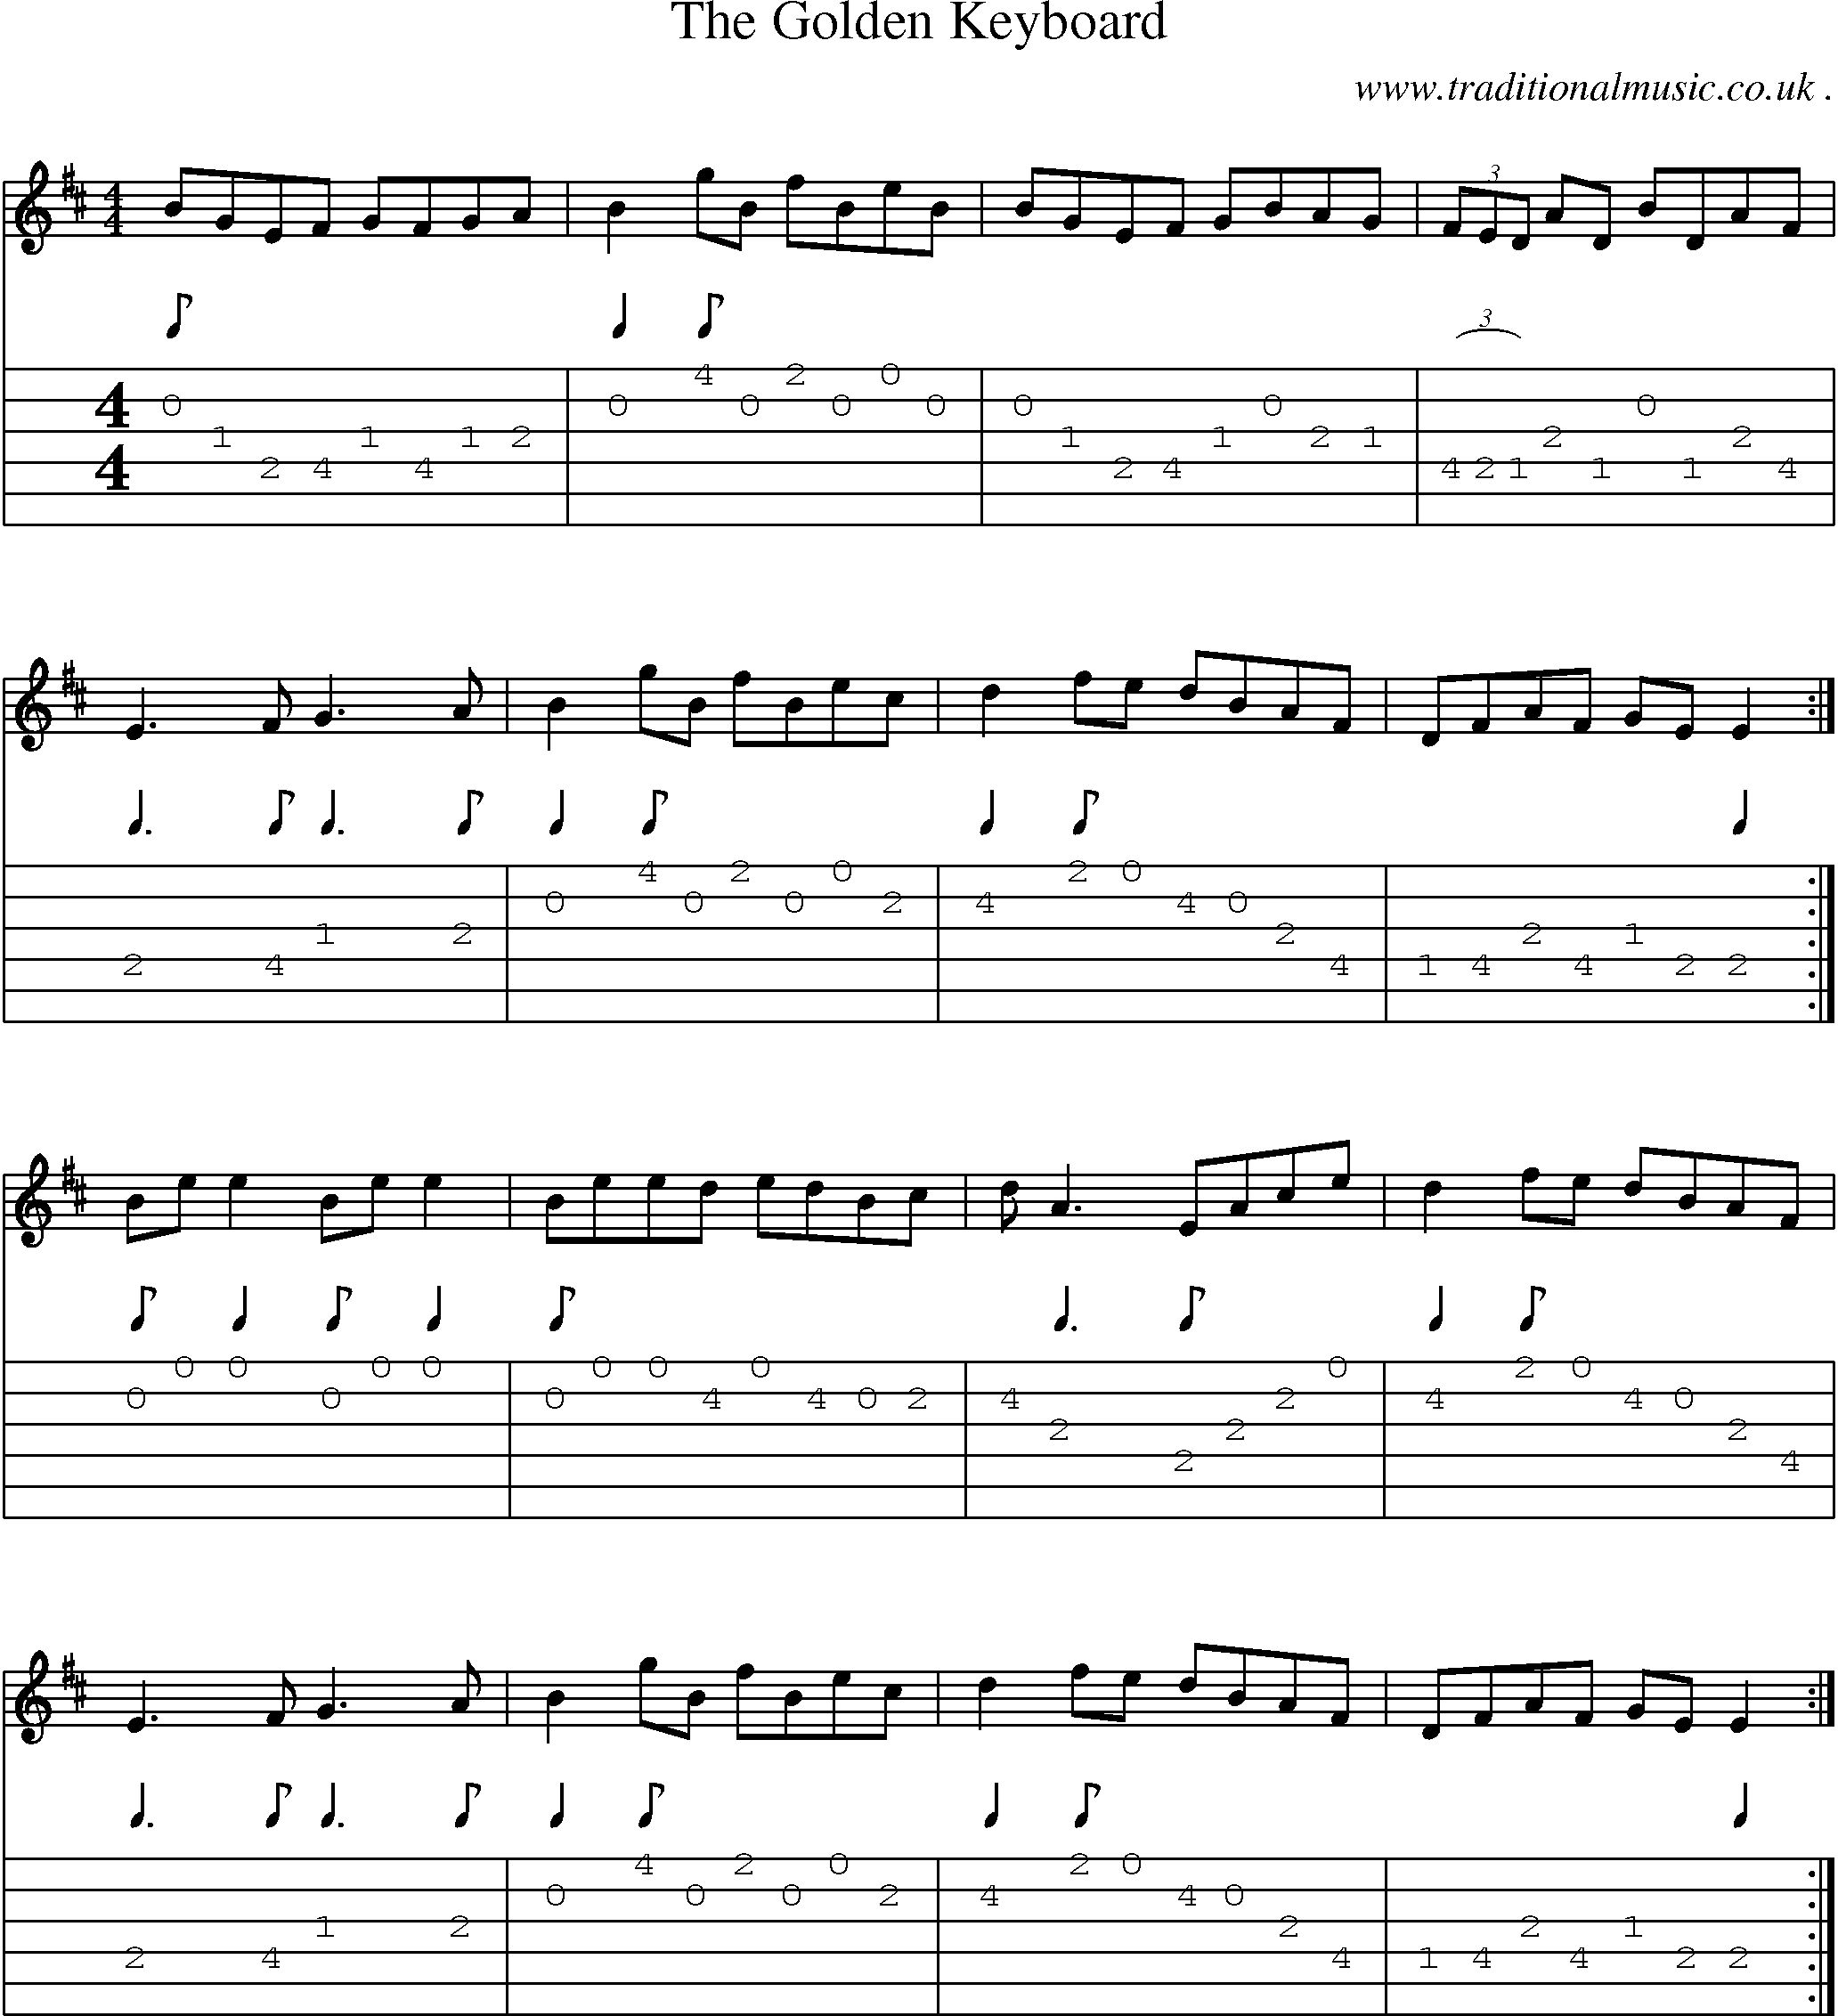 Sheet-Music and Guitar Tabs for The Golden Keyboard